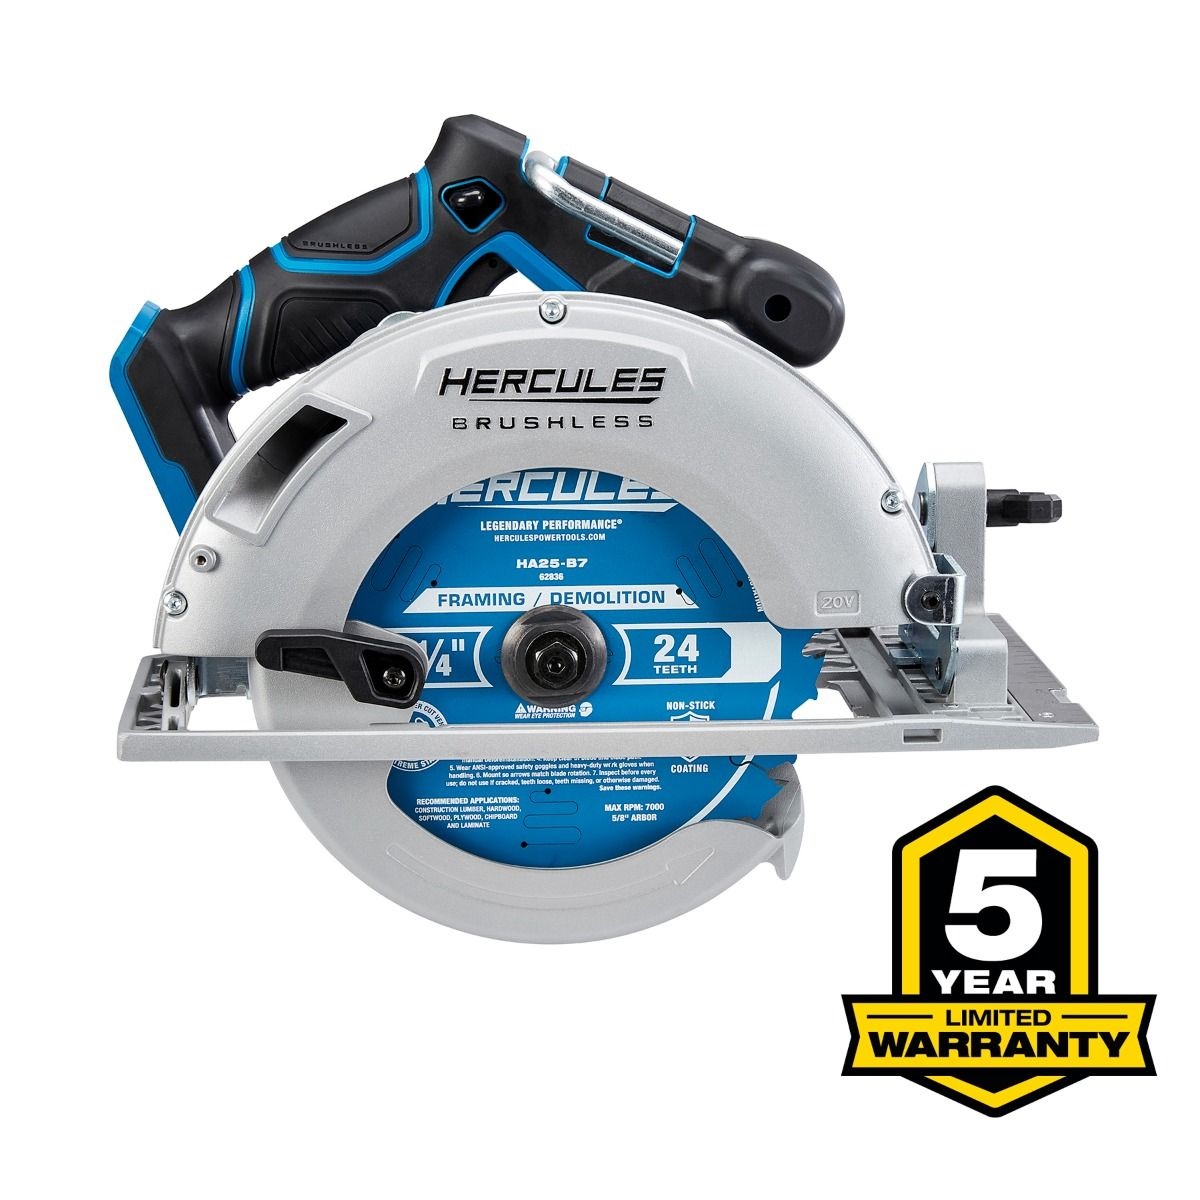 HERCULES 20v Lithium-Ion 7-1/4 In. Brushless Circular Saw – Tool Only